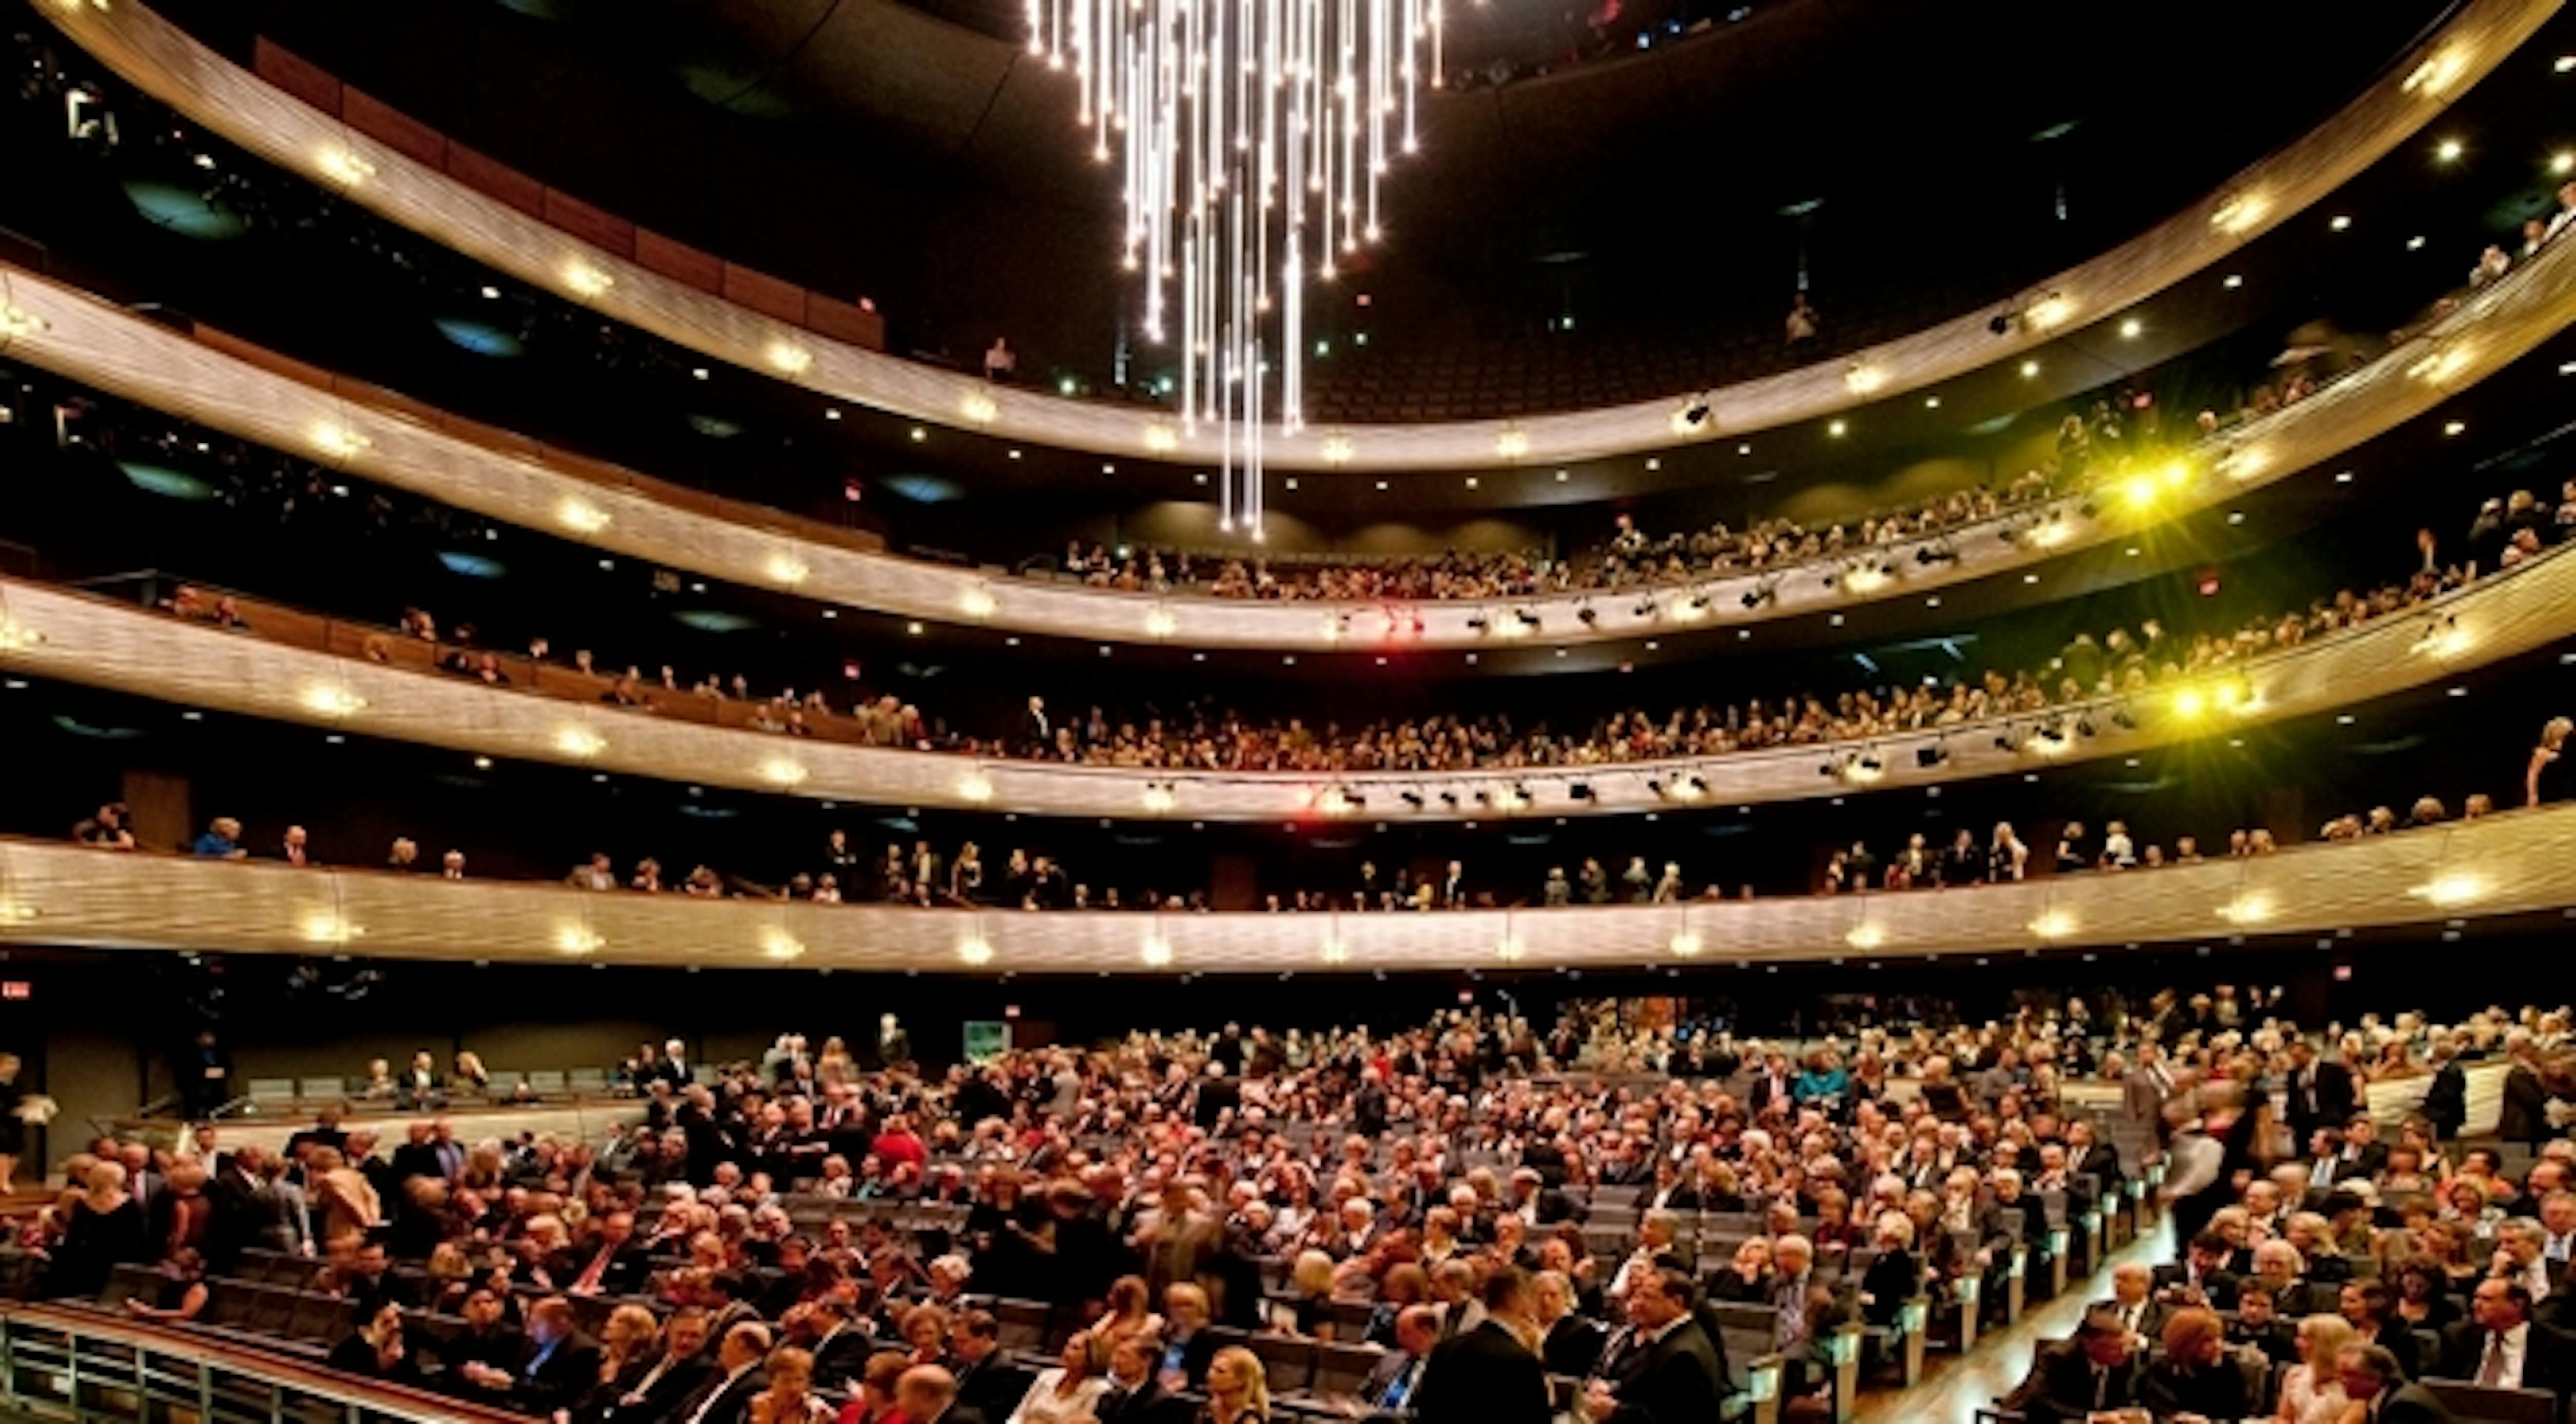 AT&T Performing Arts Center Dallas Venue All Events PartySlate